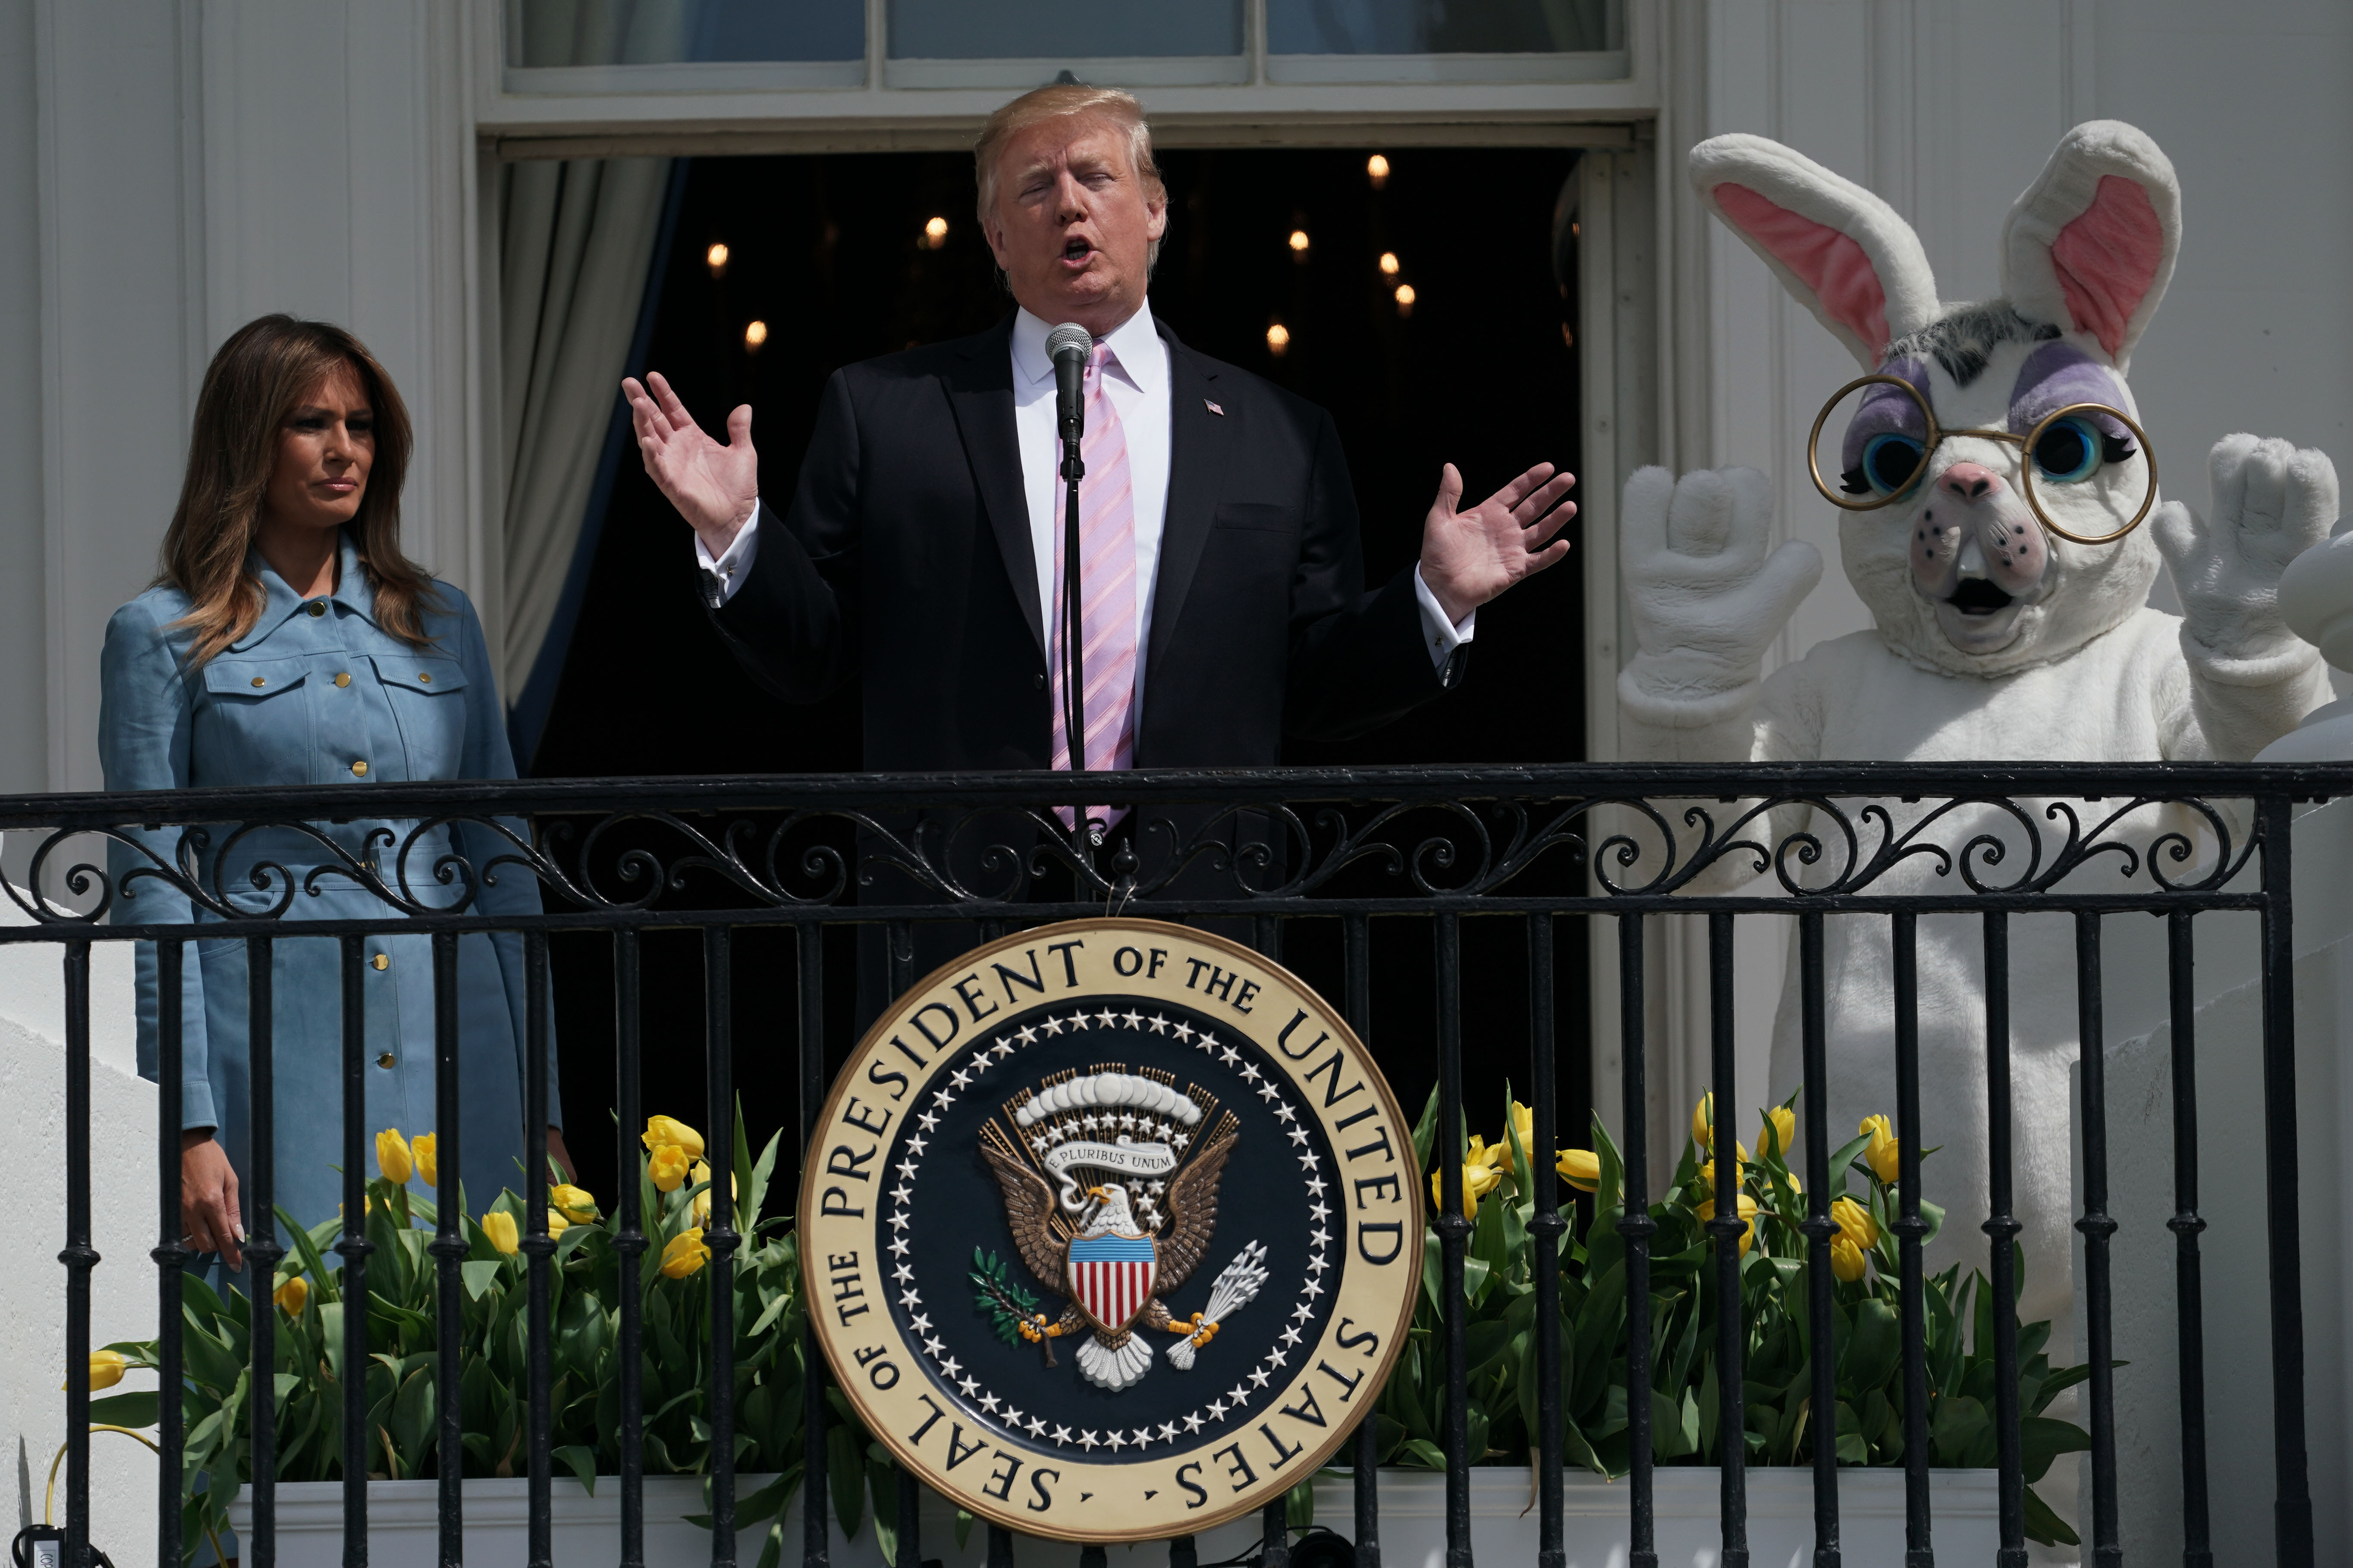 WASHINGTON, DC - APRIL 22: U.S. President Donald Trump speaks as first lady Melania Trump listens during the 141st Easter Egg Roll on the South Lawn of the White House April 22, 2019 in Washington, DC. About 30,000 people are expected to attend the annual tradition of rolling colored eggs down the South Lawn of the White House that dates back to the Rutherford B. Hayes Administration in 1878. (Photo by Alex Wong/Getty Images)